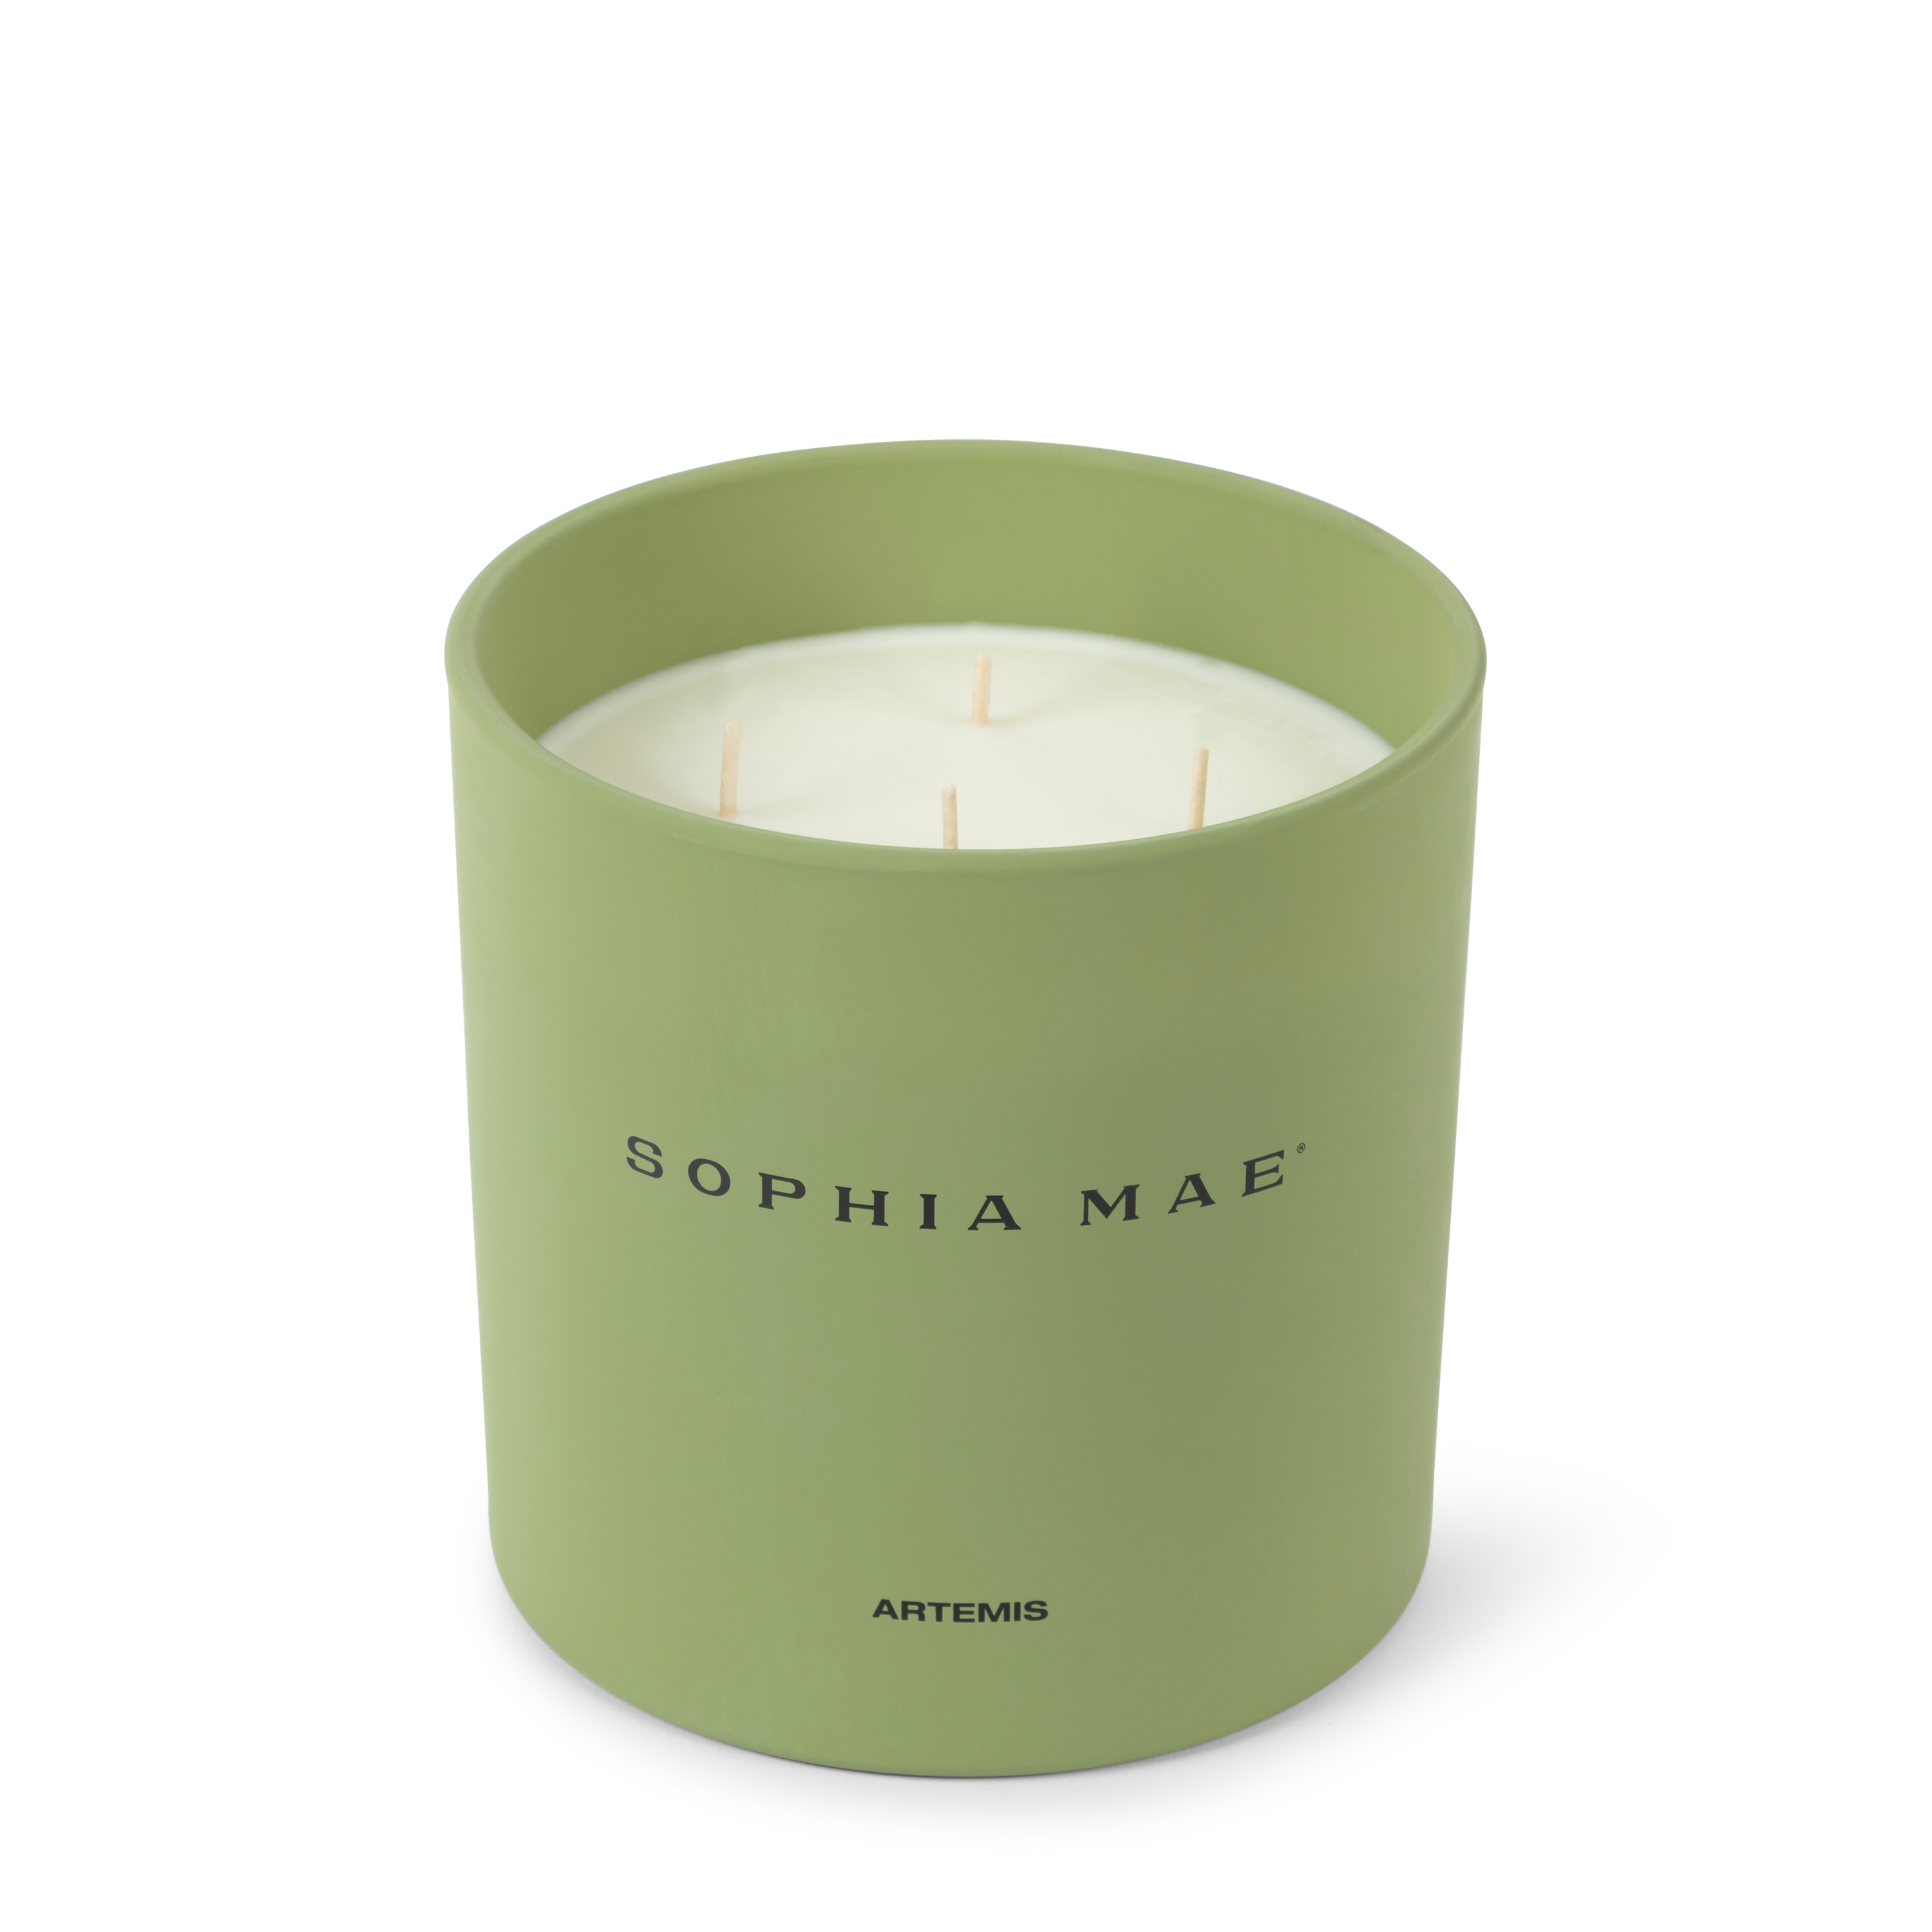 ARTEMIS SCENTED CANDLE MAXI | SOPHIA MAE by Monica Geuze